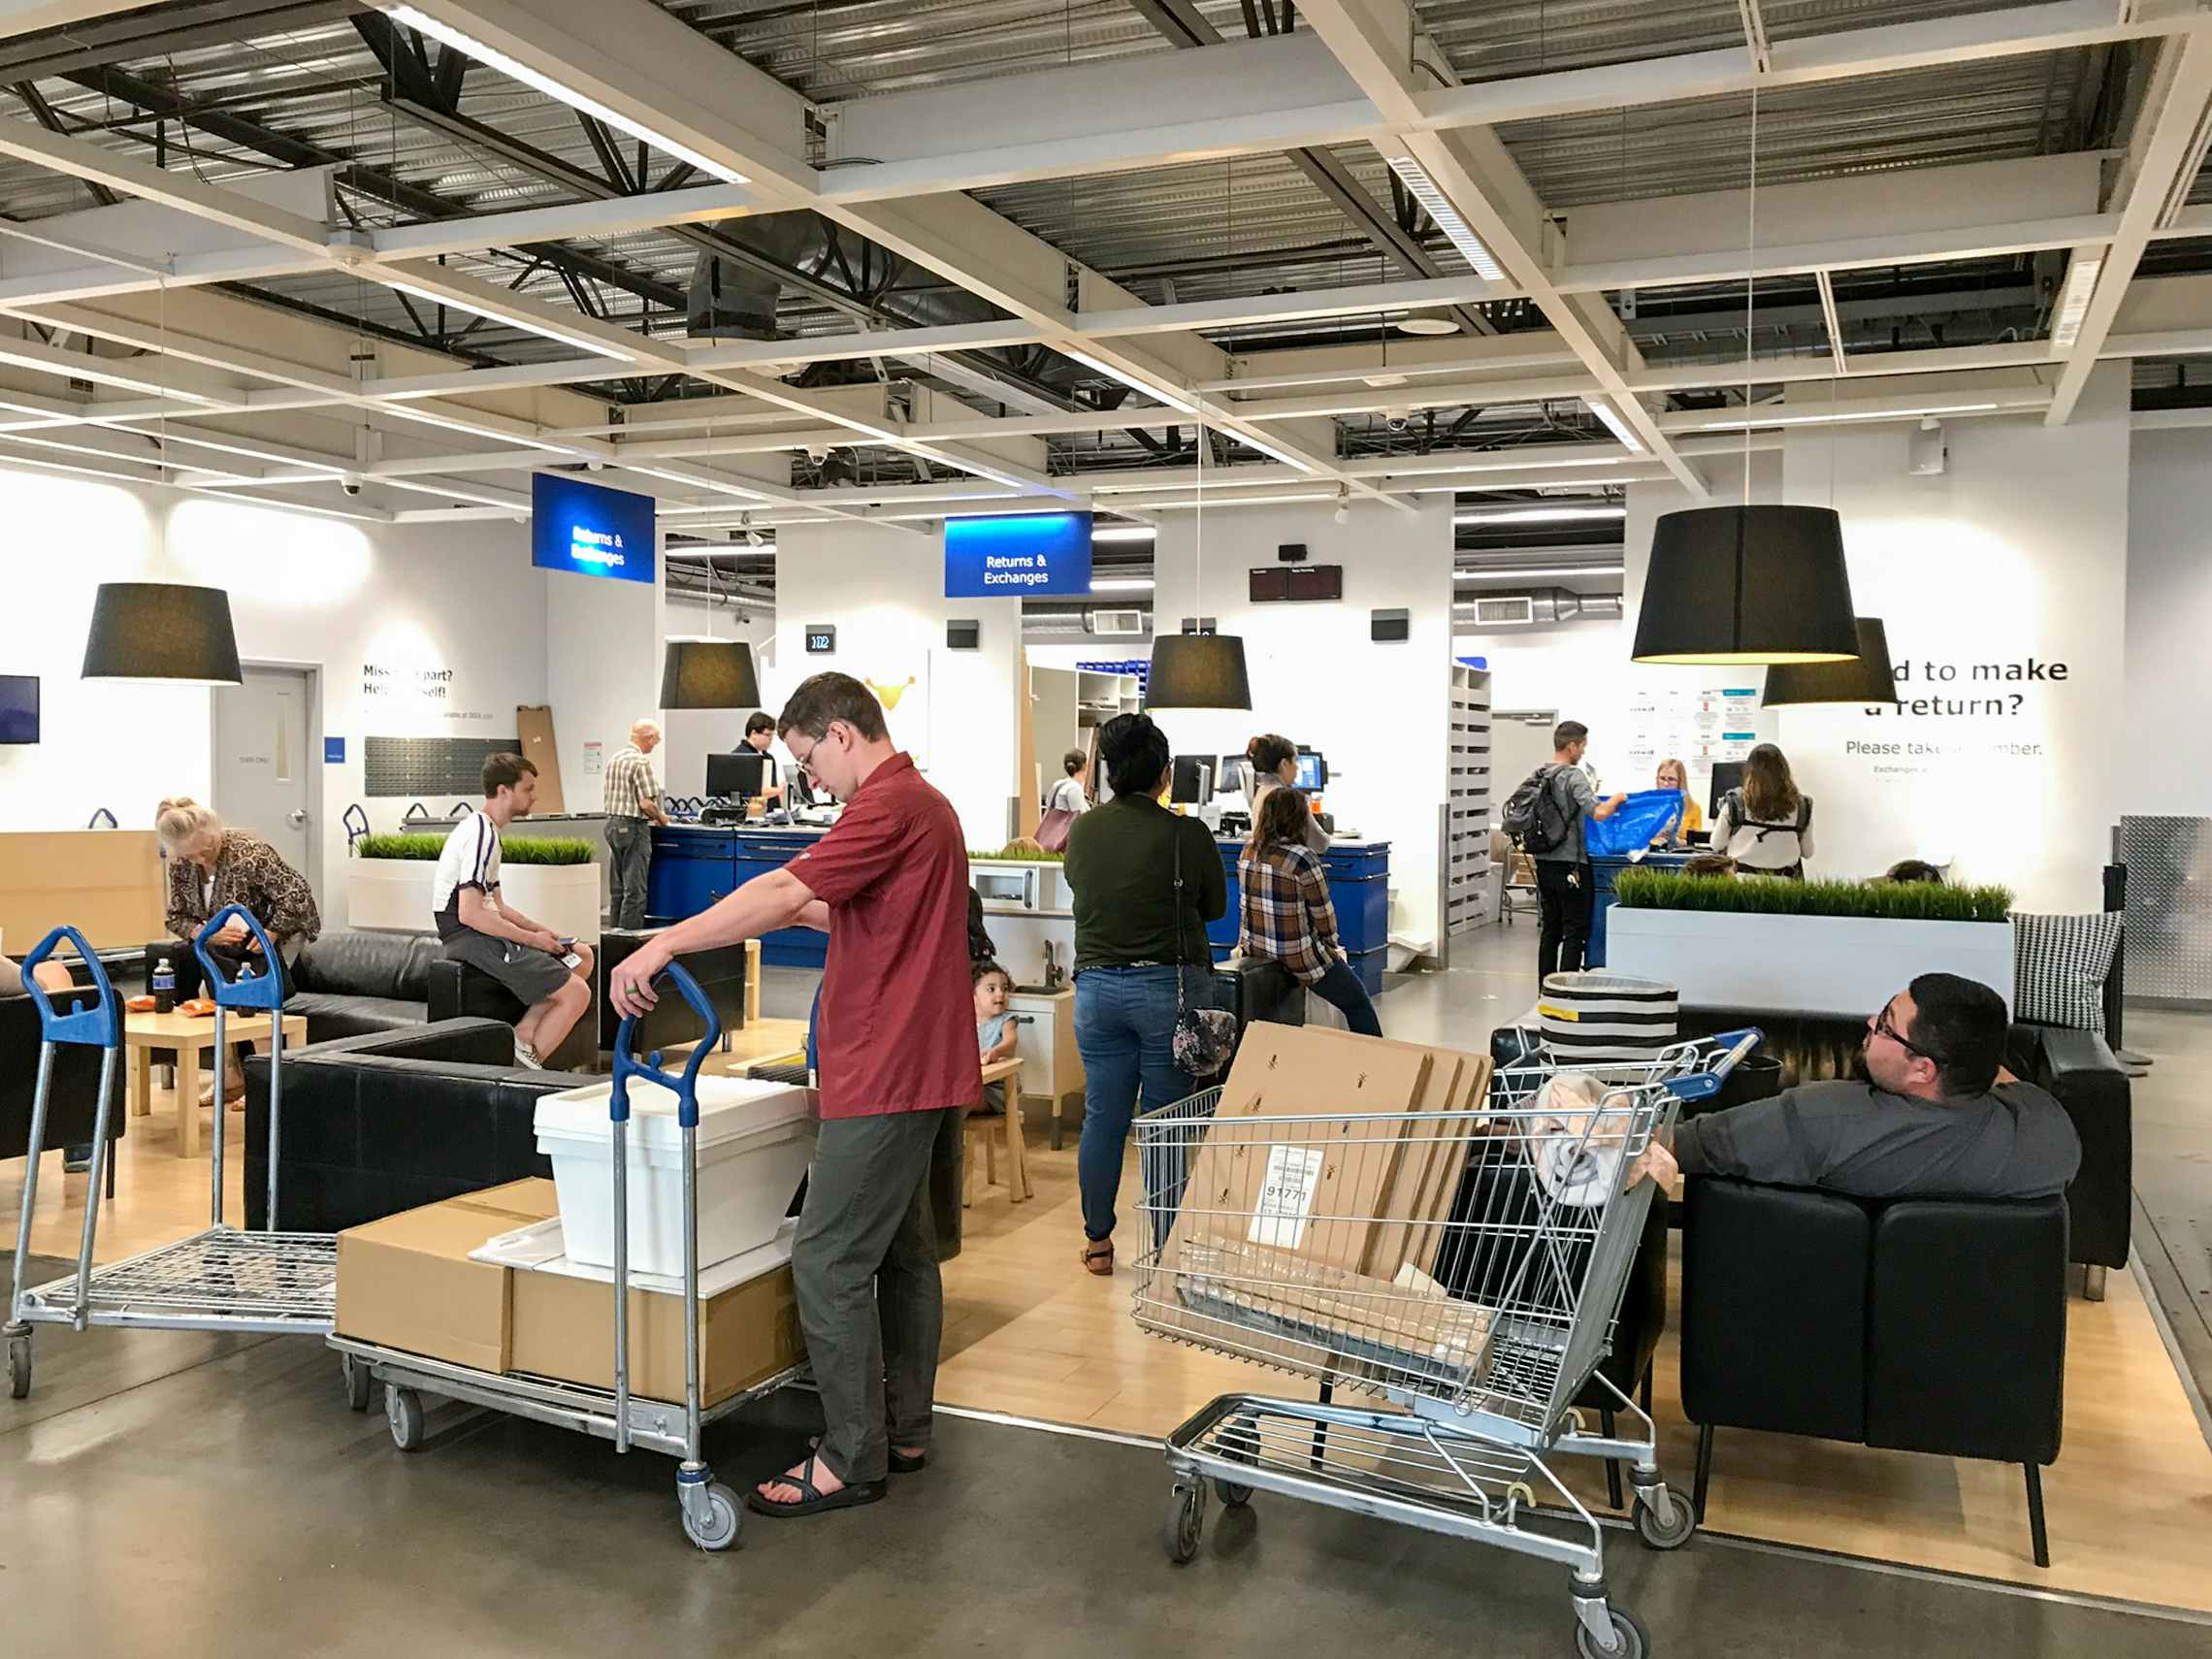 People waiting in line at the Ikea Returns & Exchanges counter